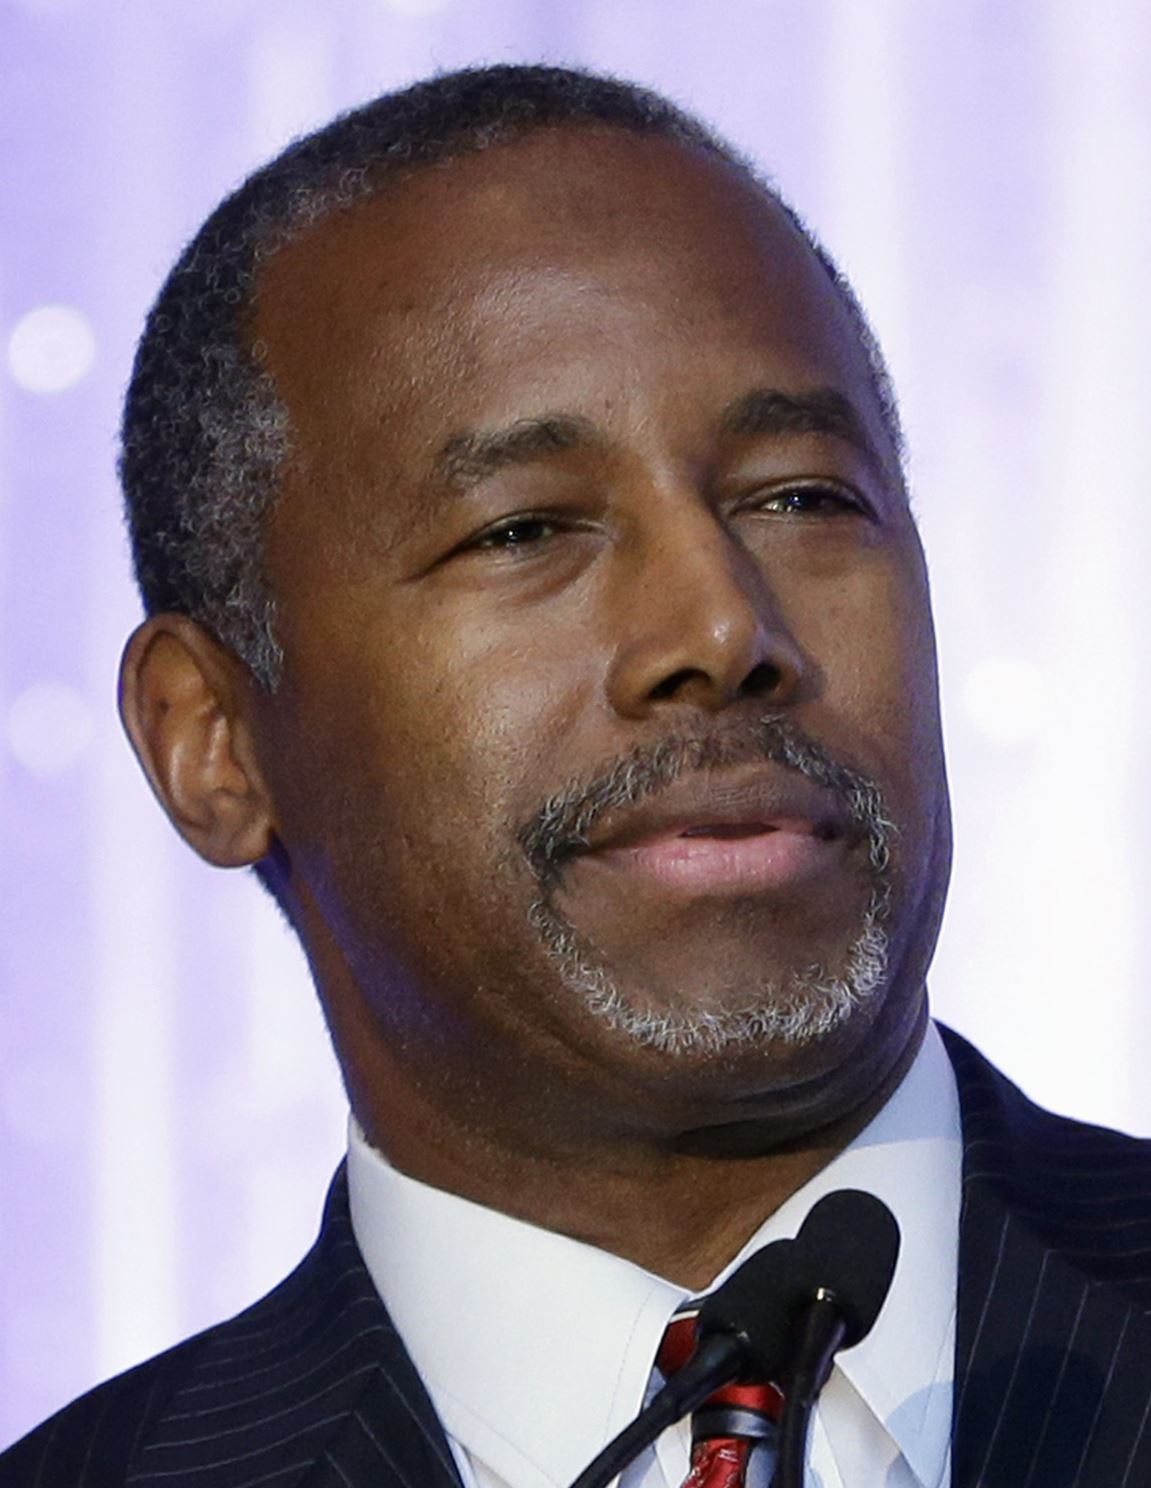 Carson Questions on background aren't "real" scandals The Blade